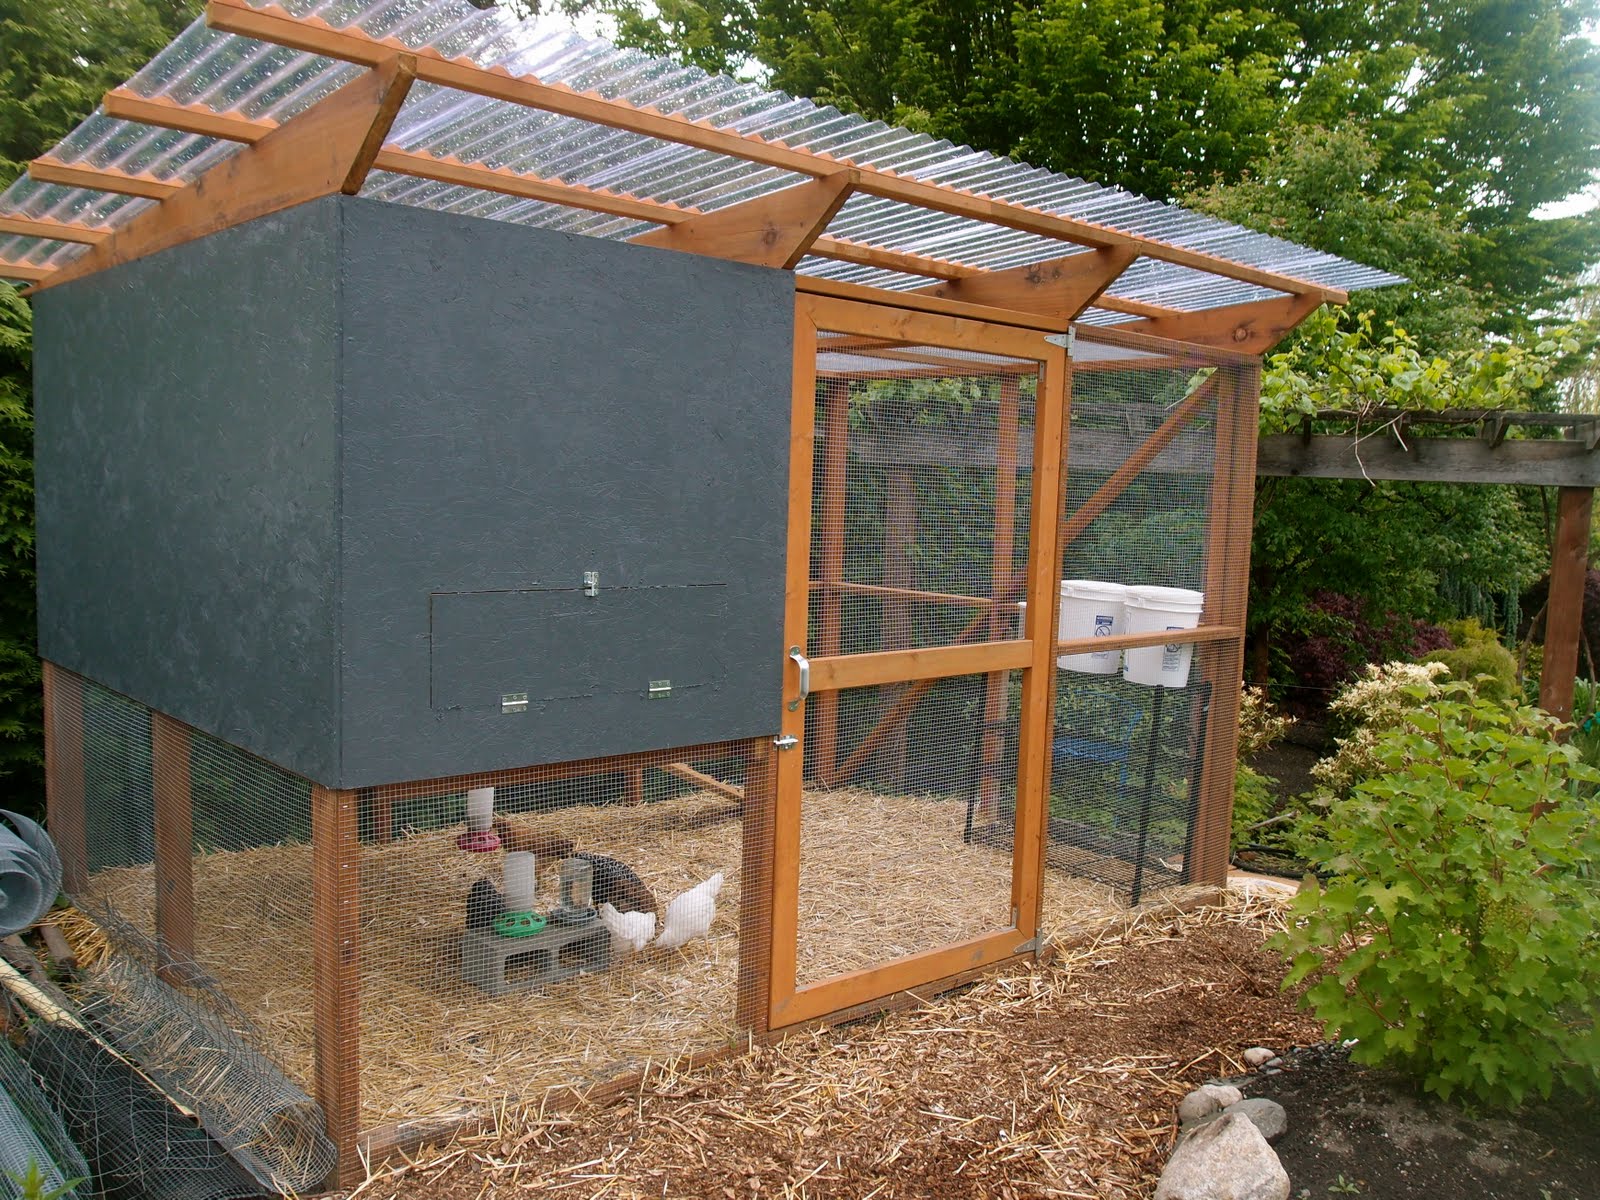 ; you can see we have not yet painted the interior OSB of the coop ...